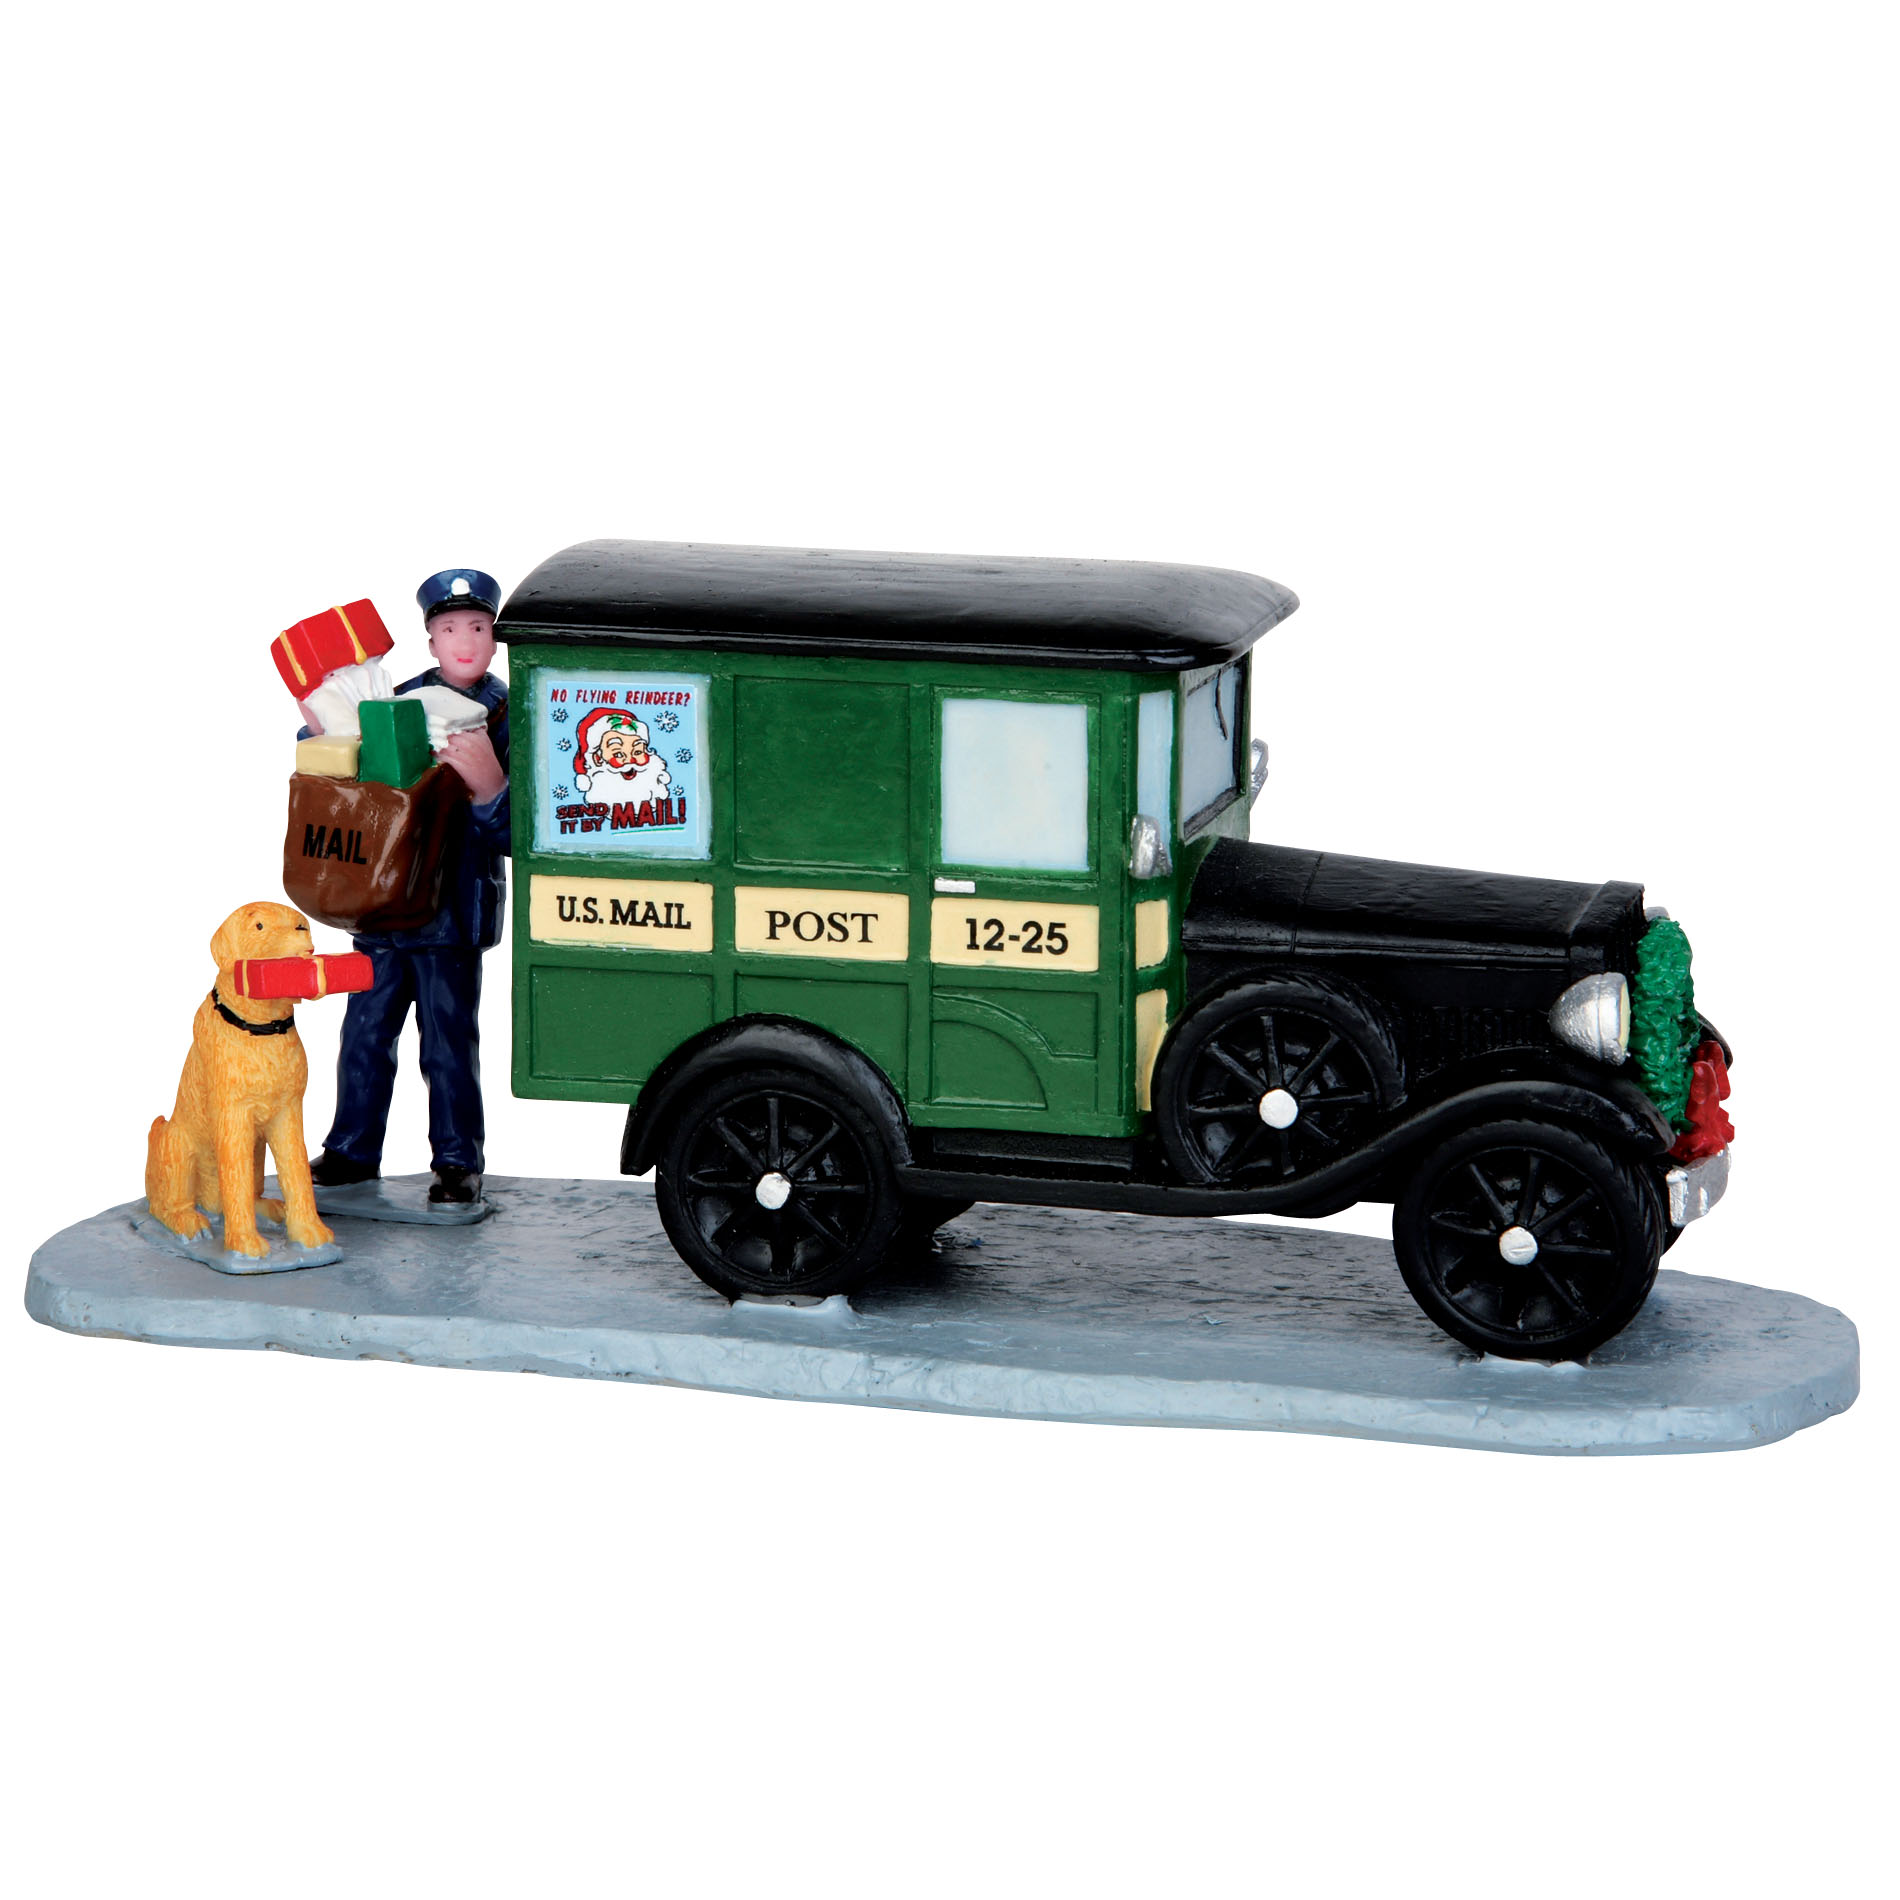 Lemax Village Collection Christmas Village Accessory, Christmas Delivery